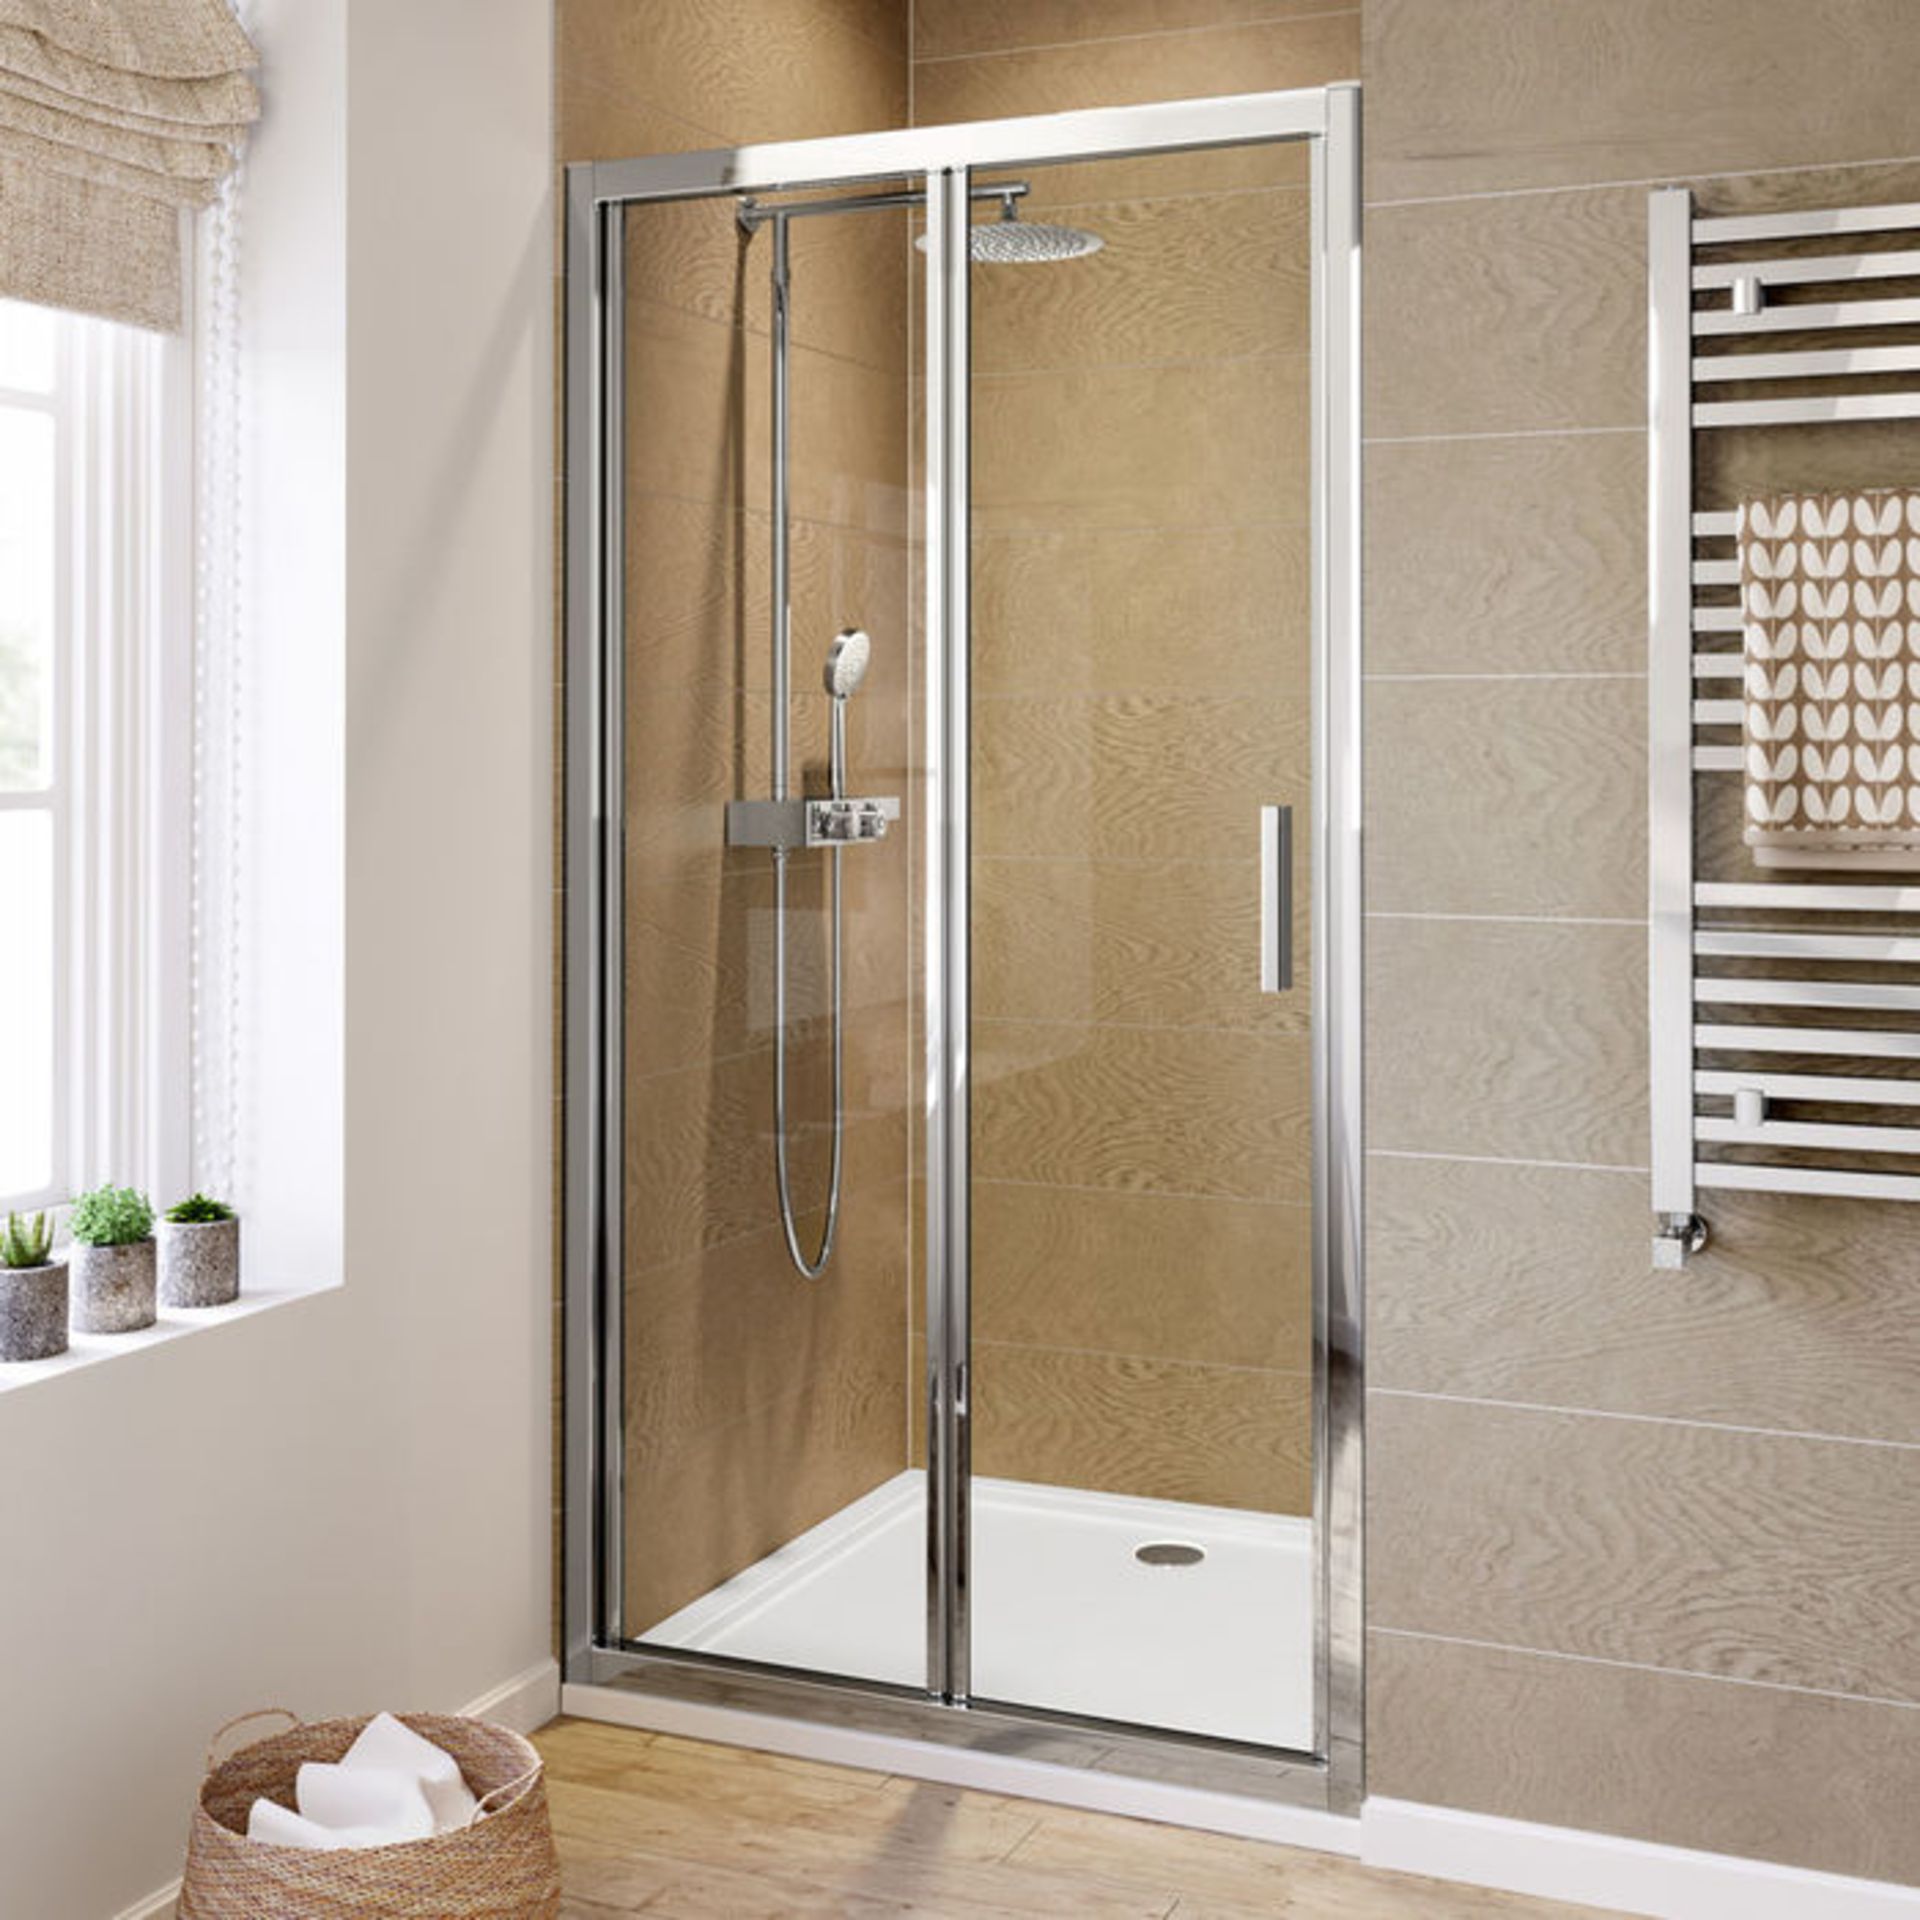 (ZA215) 1000mm - 6mm - Elements EasyClean Bifold Shower Door. RRP £239.99. 6mm Safety Glass - - Image 3 of 5